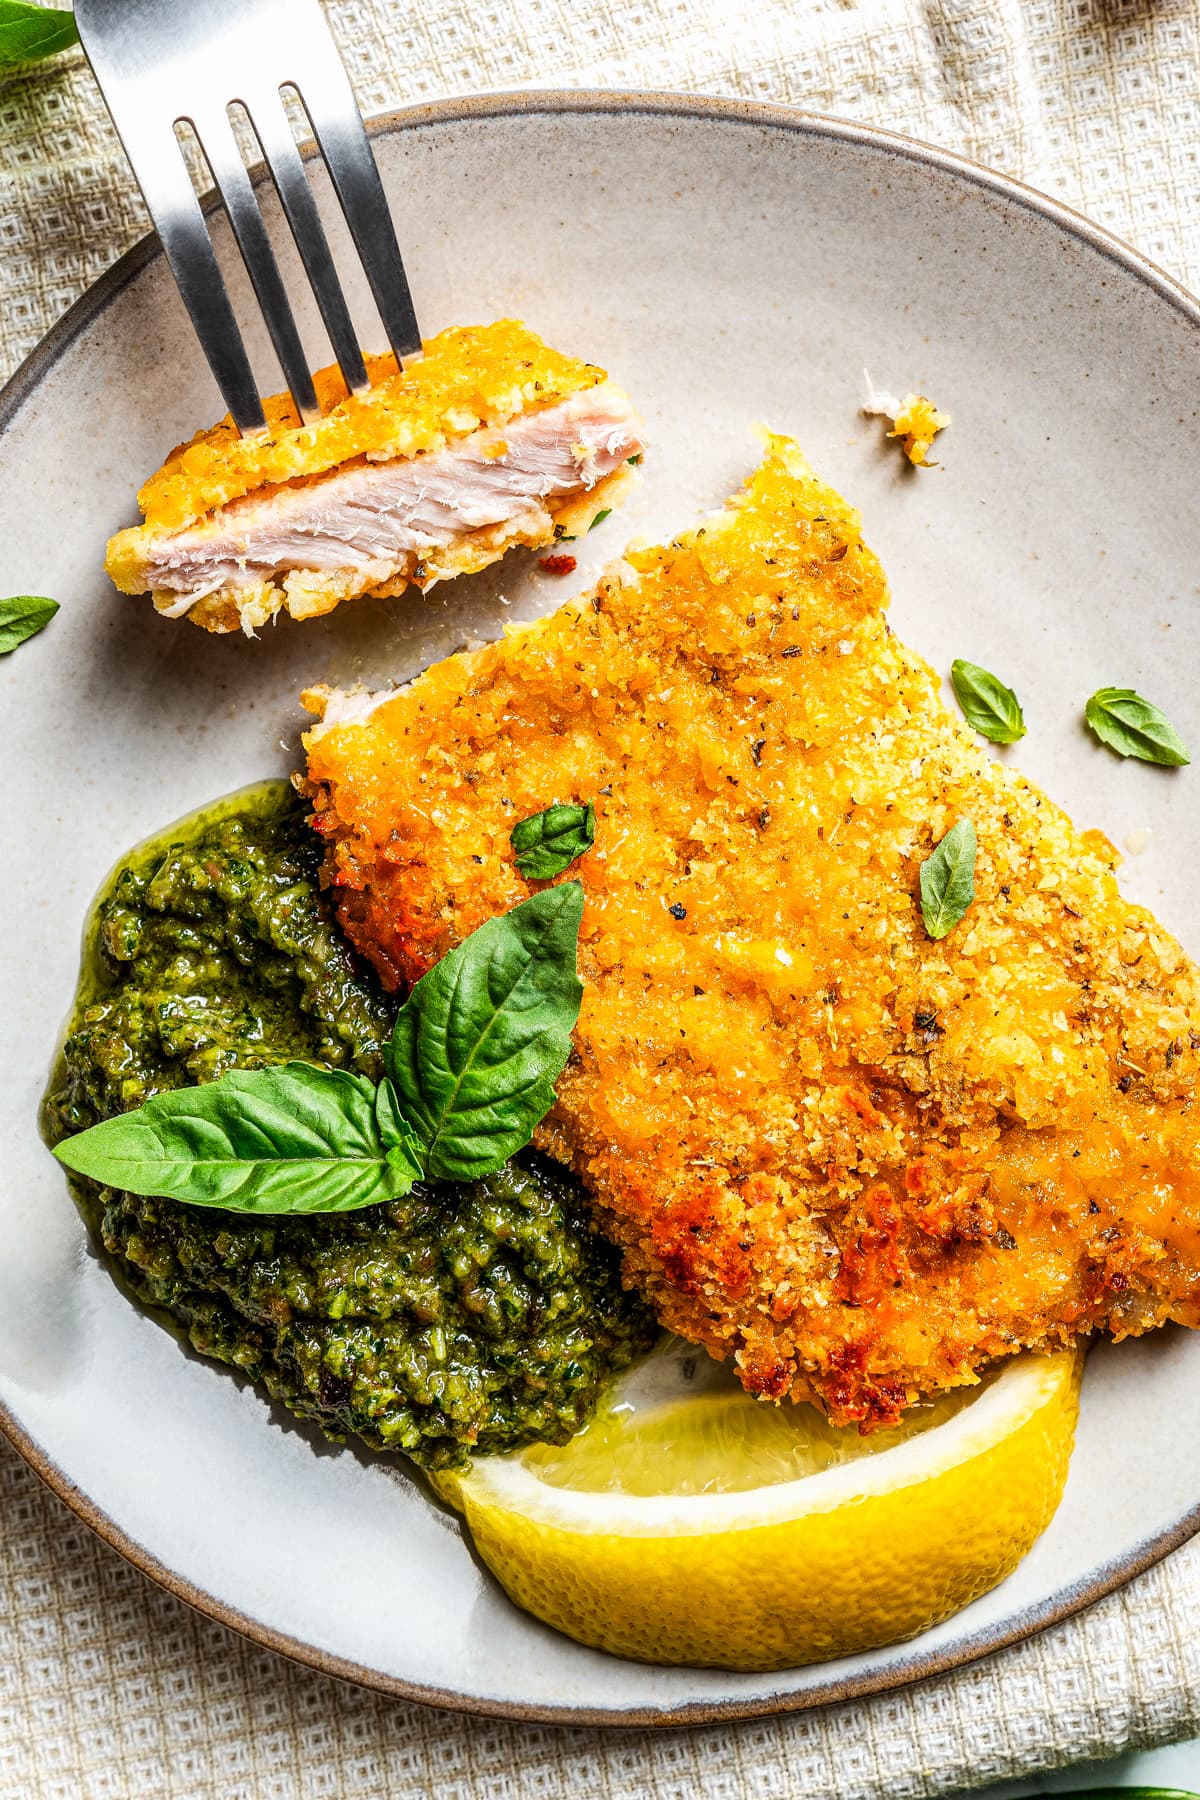 Taking a bite out of breaded pork chops served on a plate with bacon-kale pesto and a slice of lemon.